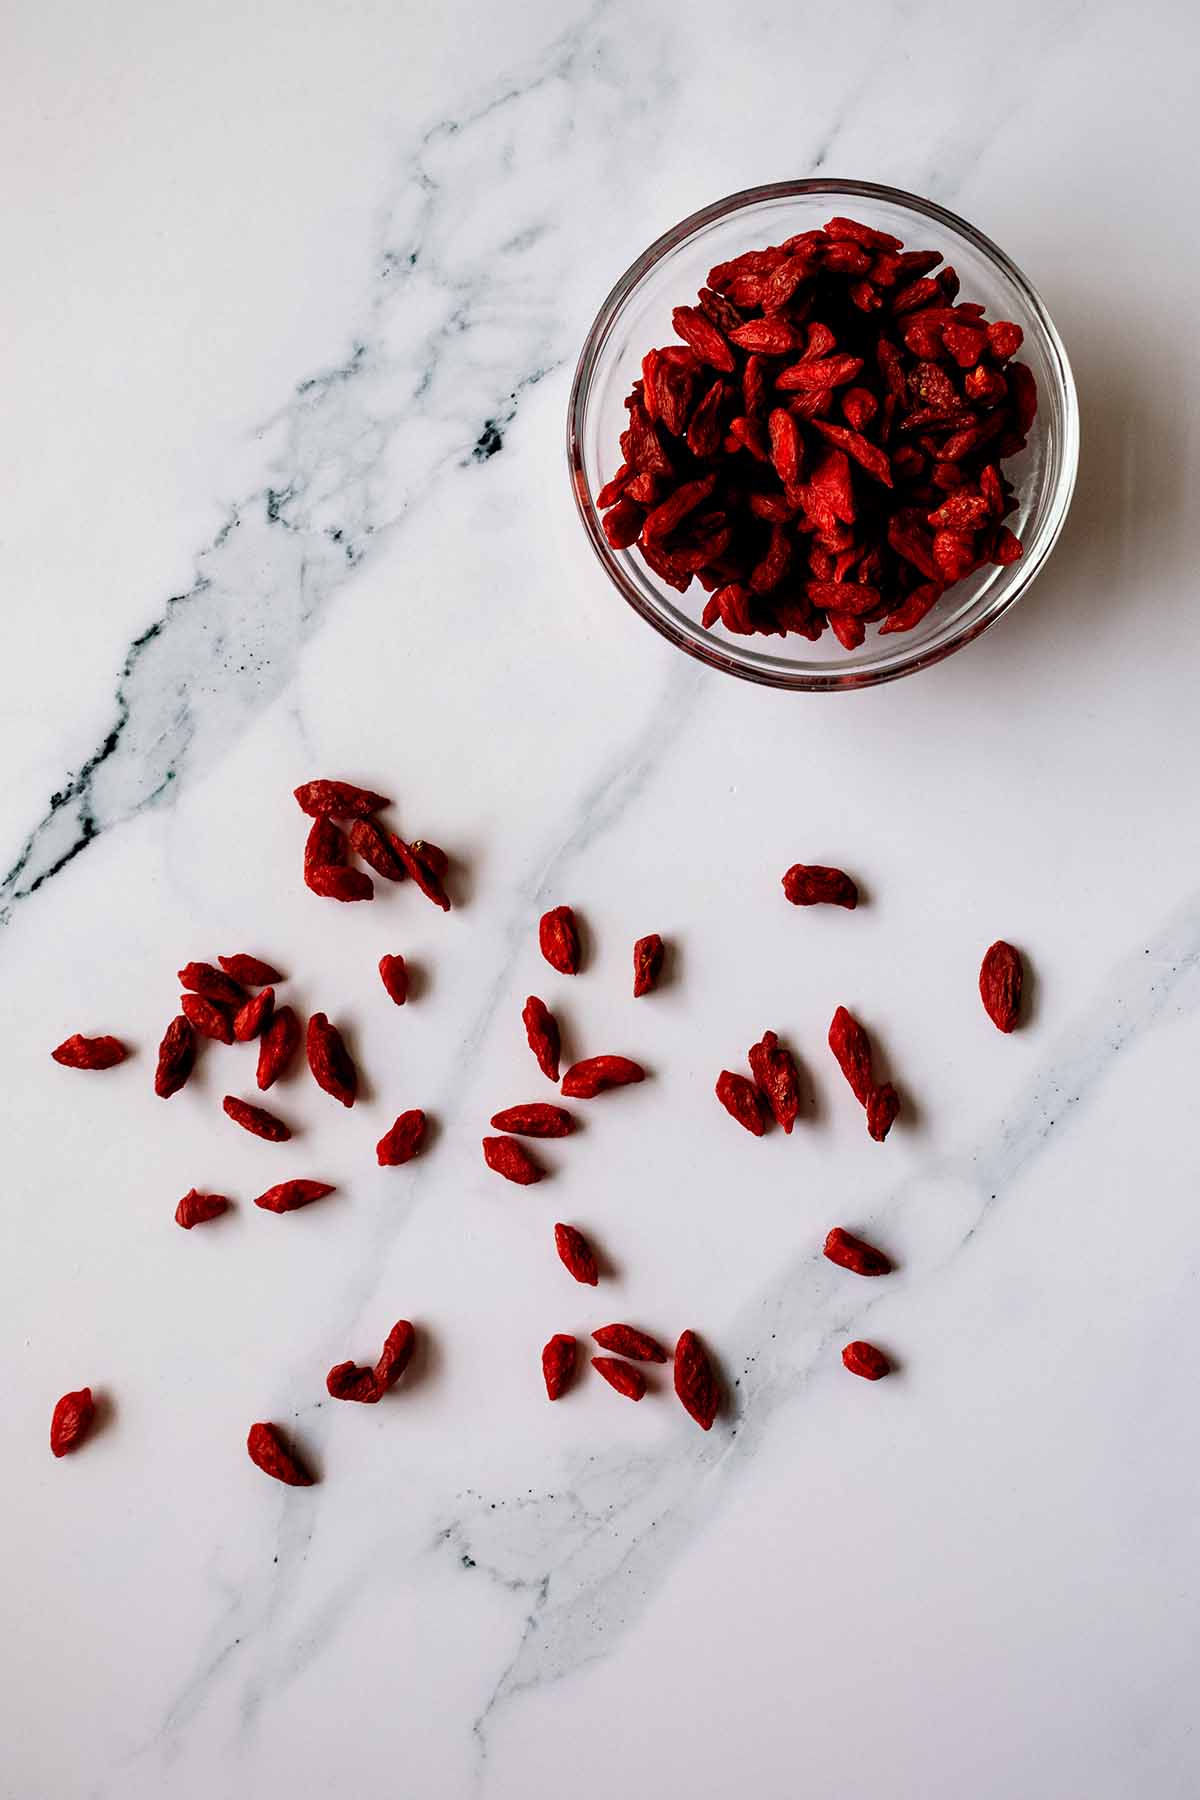 Goji berries on a white marble background with a small glass bowl of goji berries